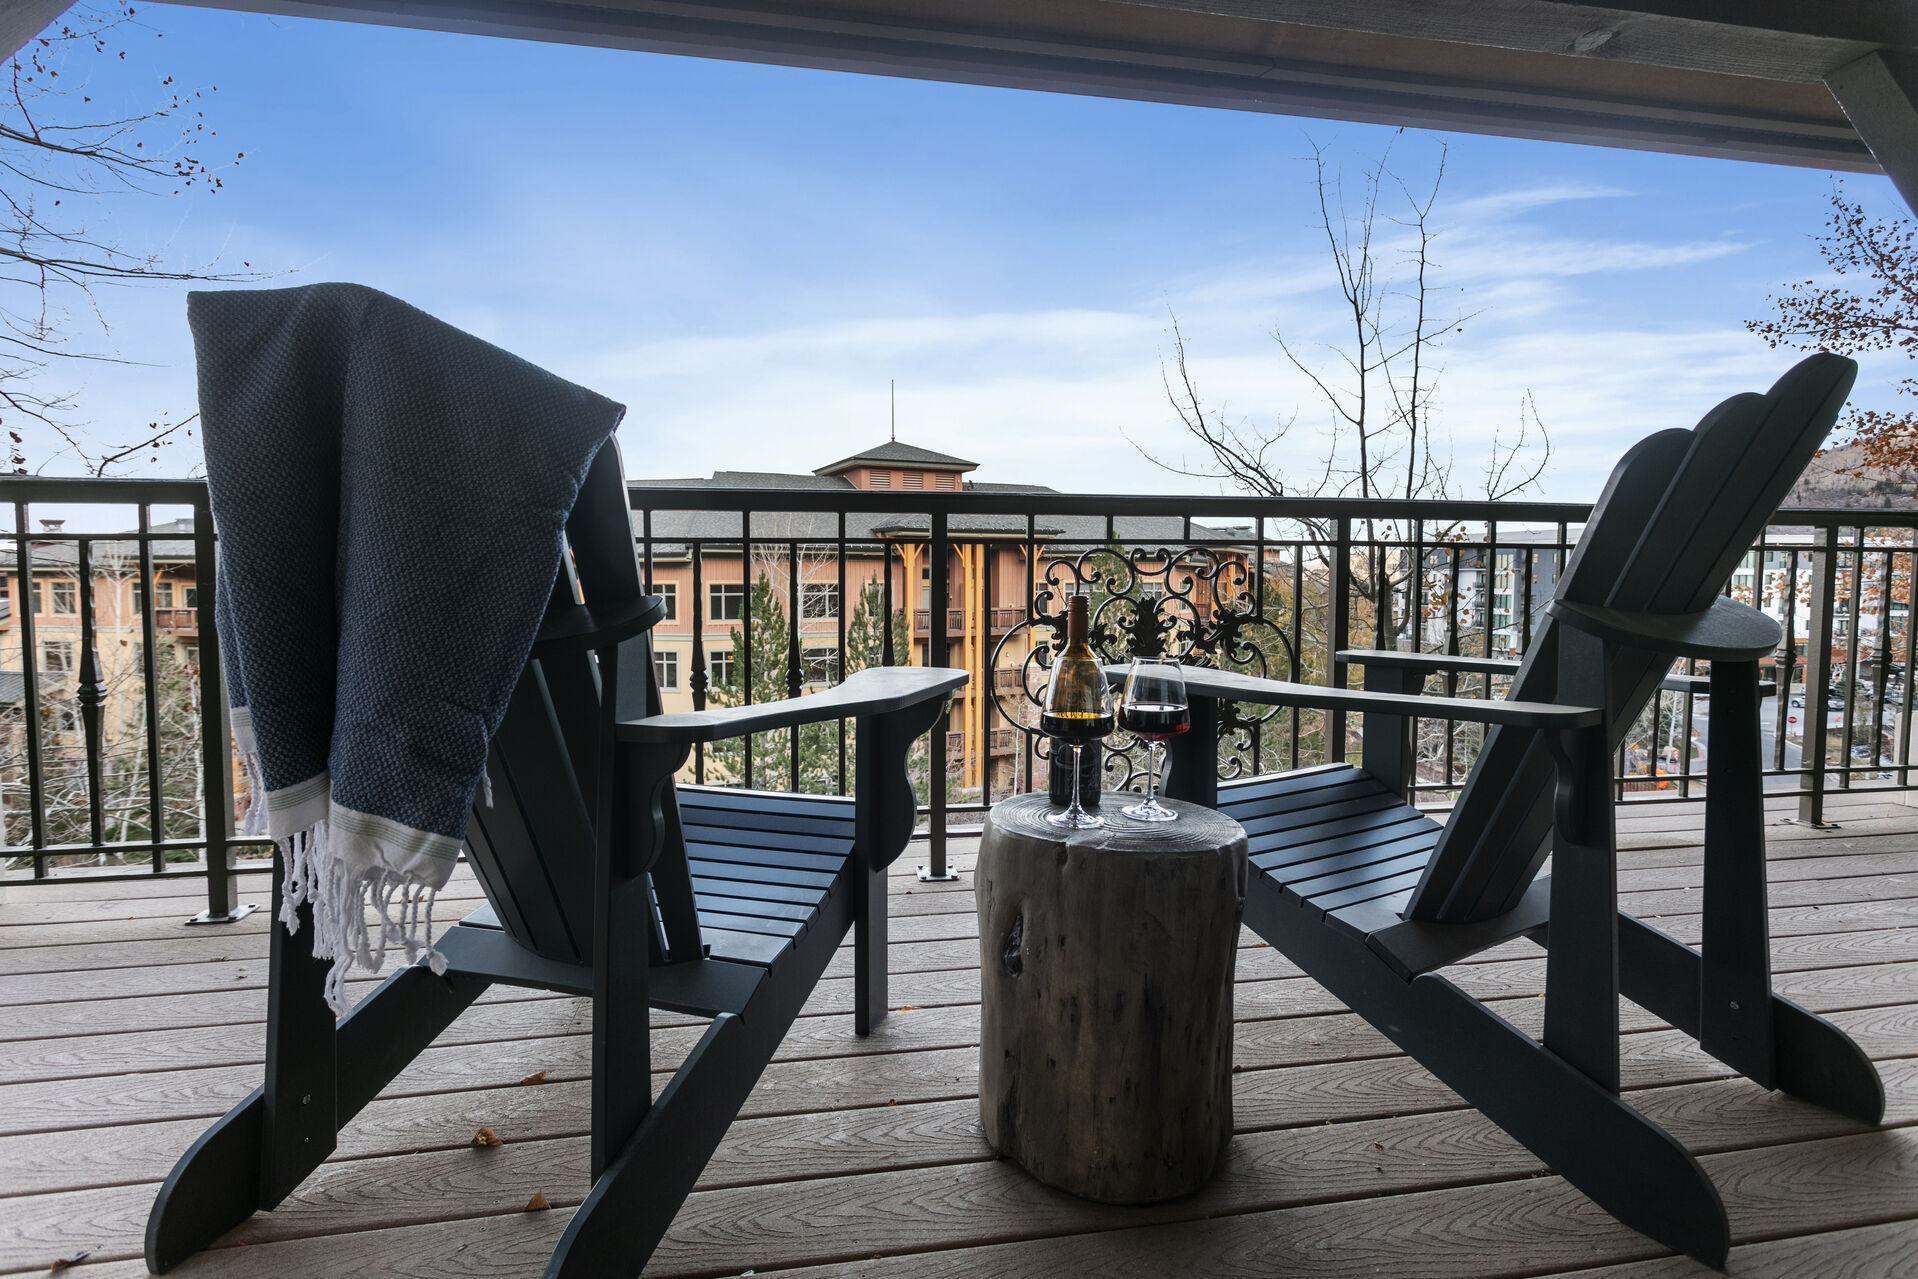 Private patio with chairs to overlook the Canyons Village w/ Traeger smoker on the deck.